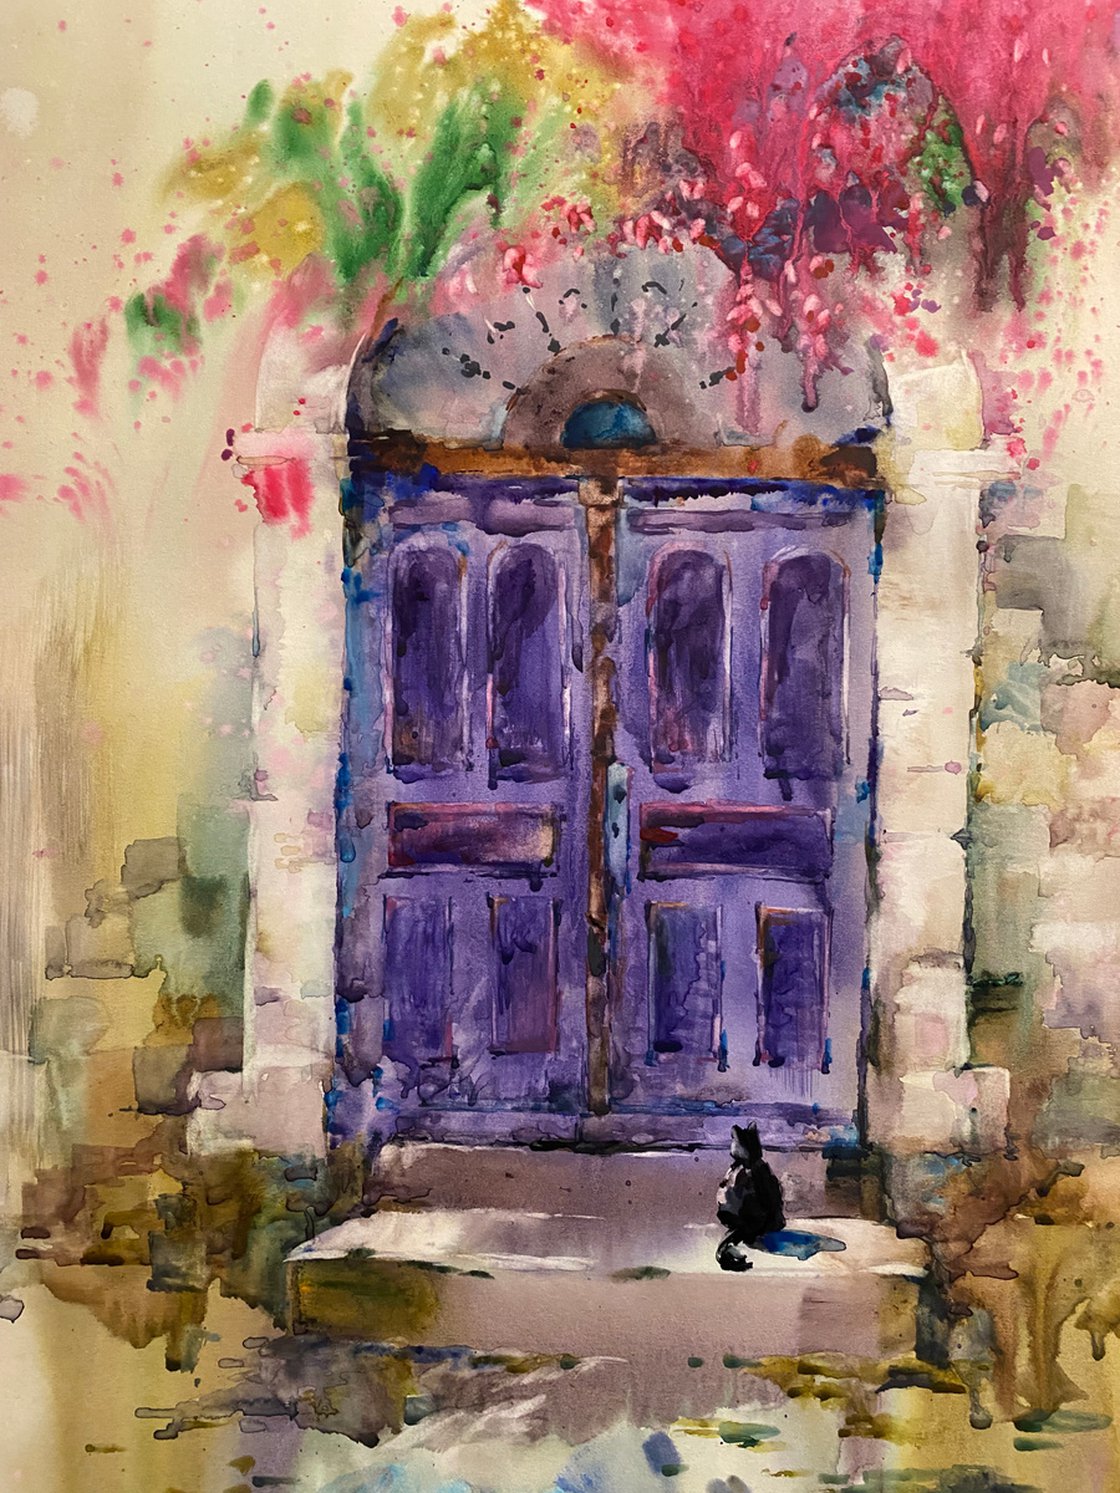 Last night I dreamed I went to Manderley AgainRebecca-inspired  Watercolor! : r/Watercolor